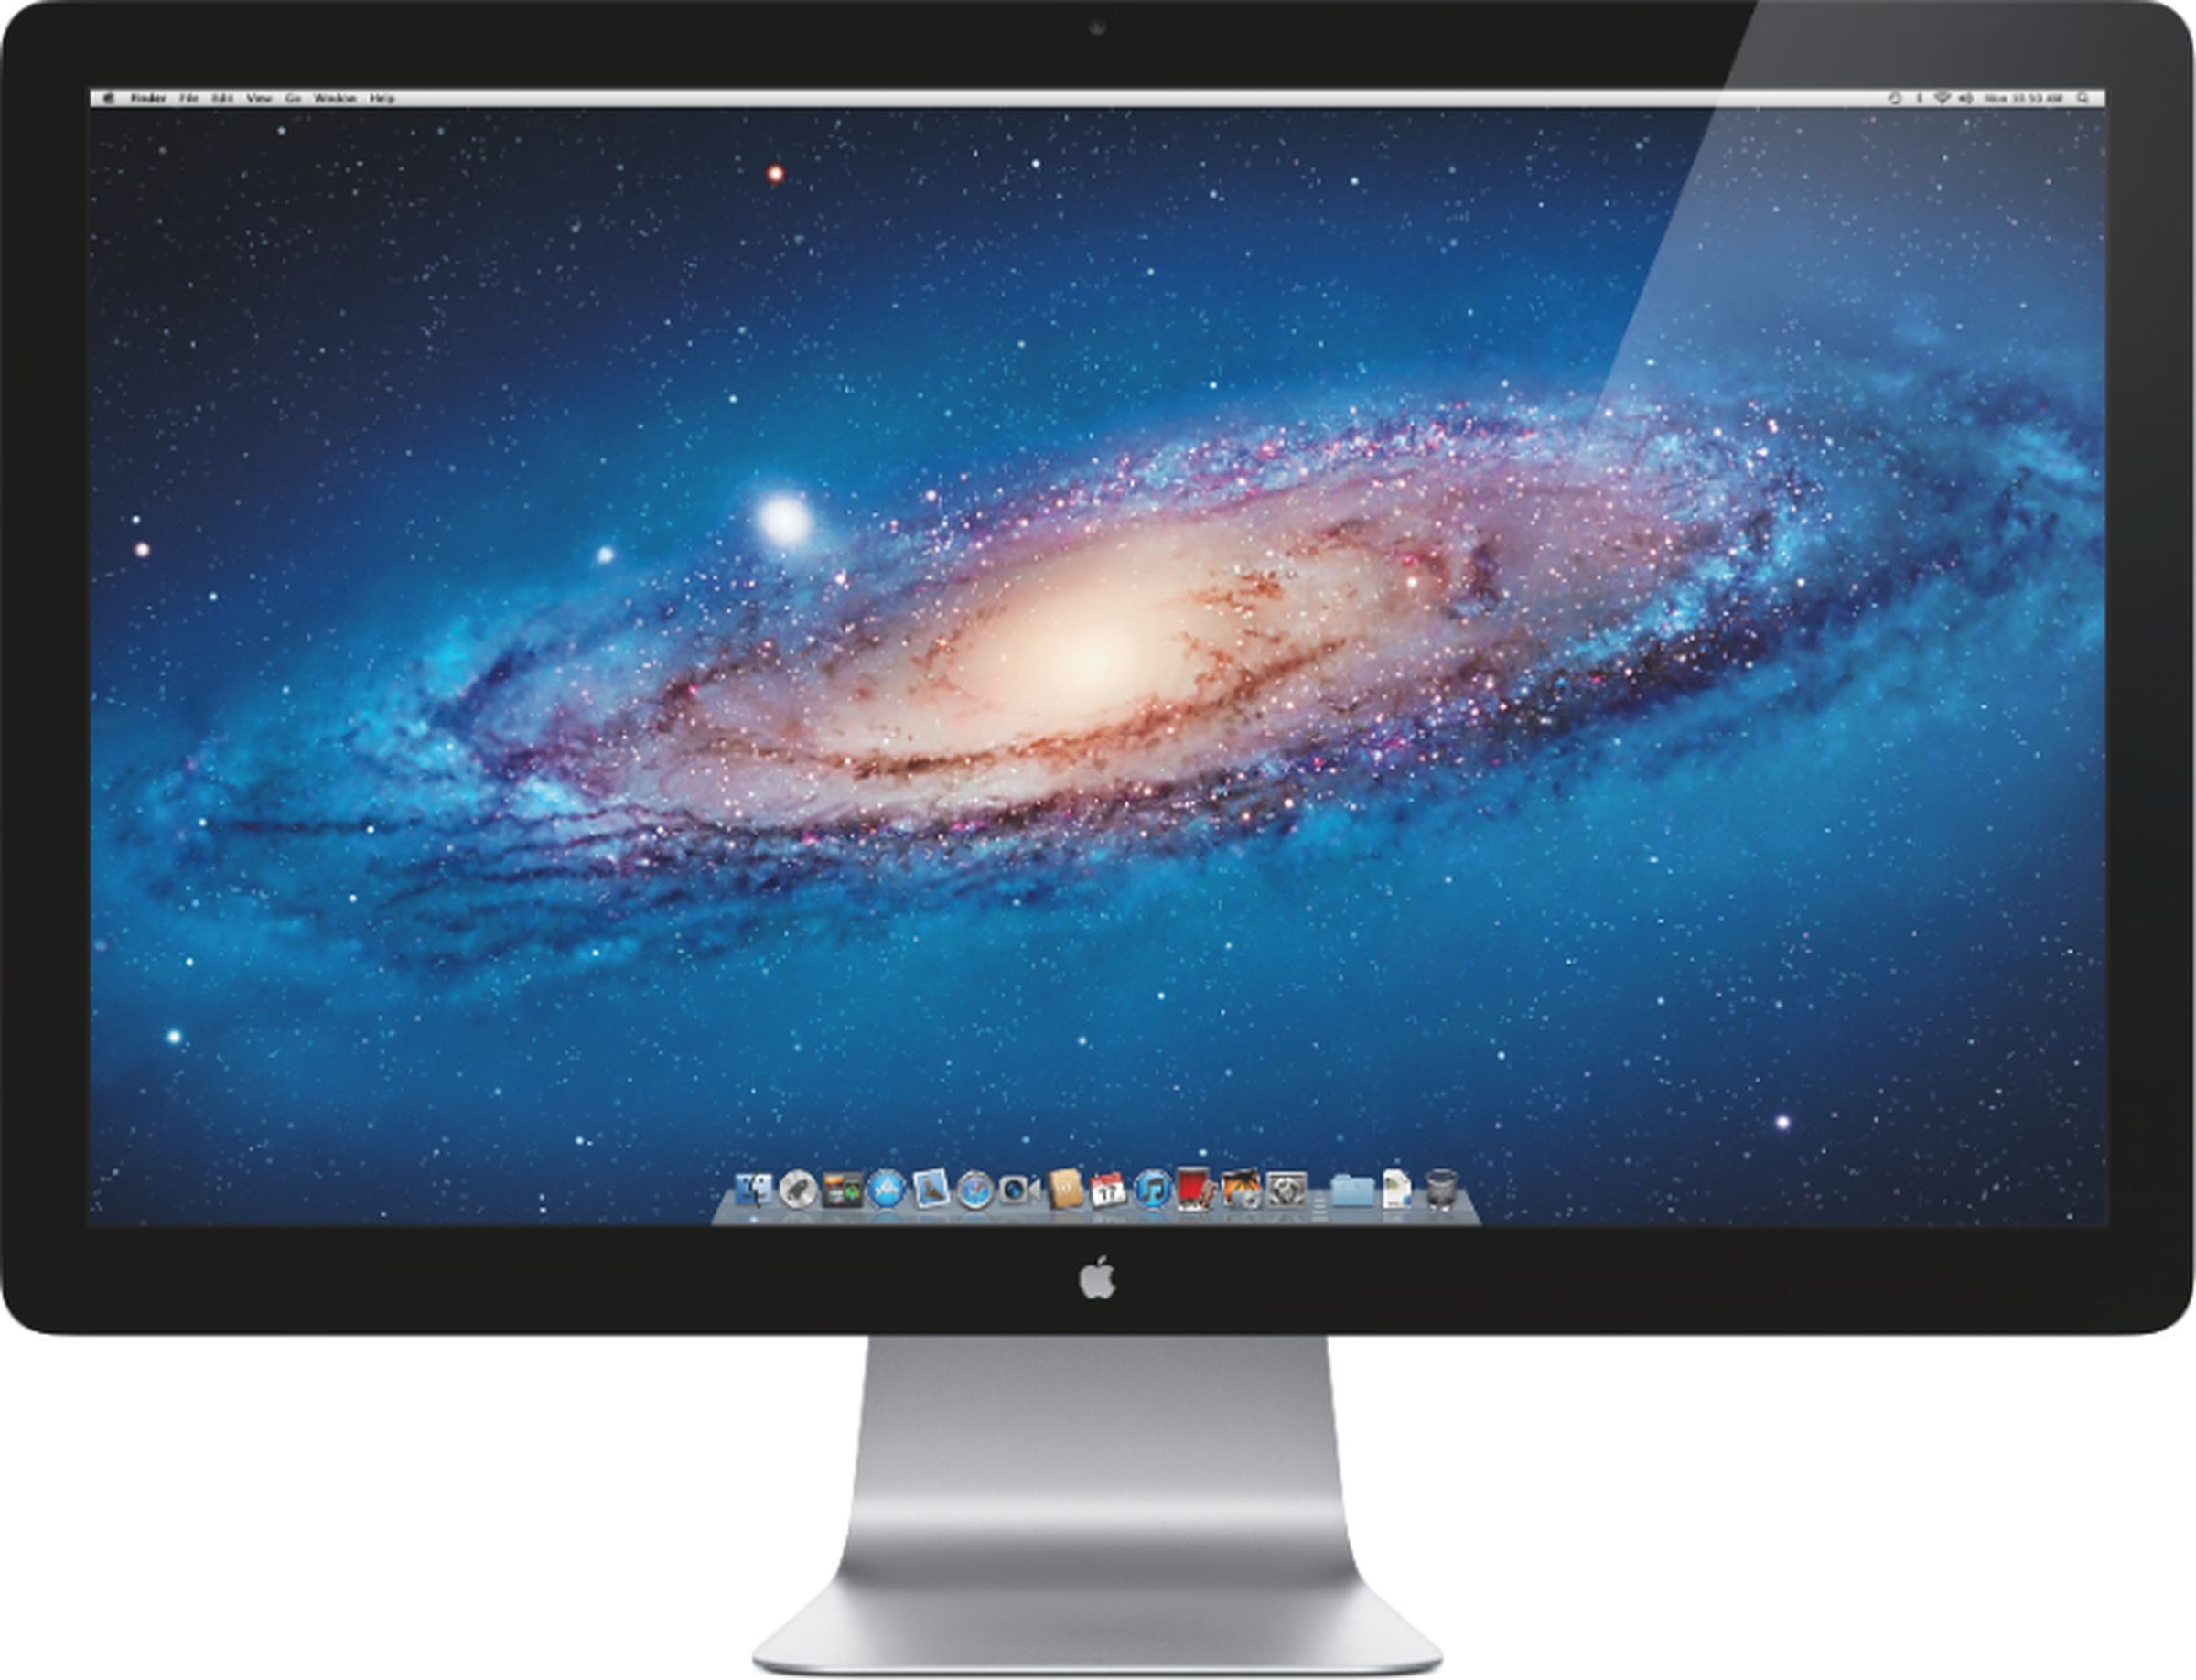 Apple 27-inch Thunderbolt Display now available: FaceTime HD camera, 2.1 speaker system, and $999 price tag